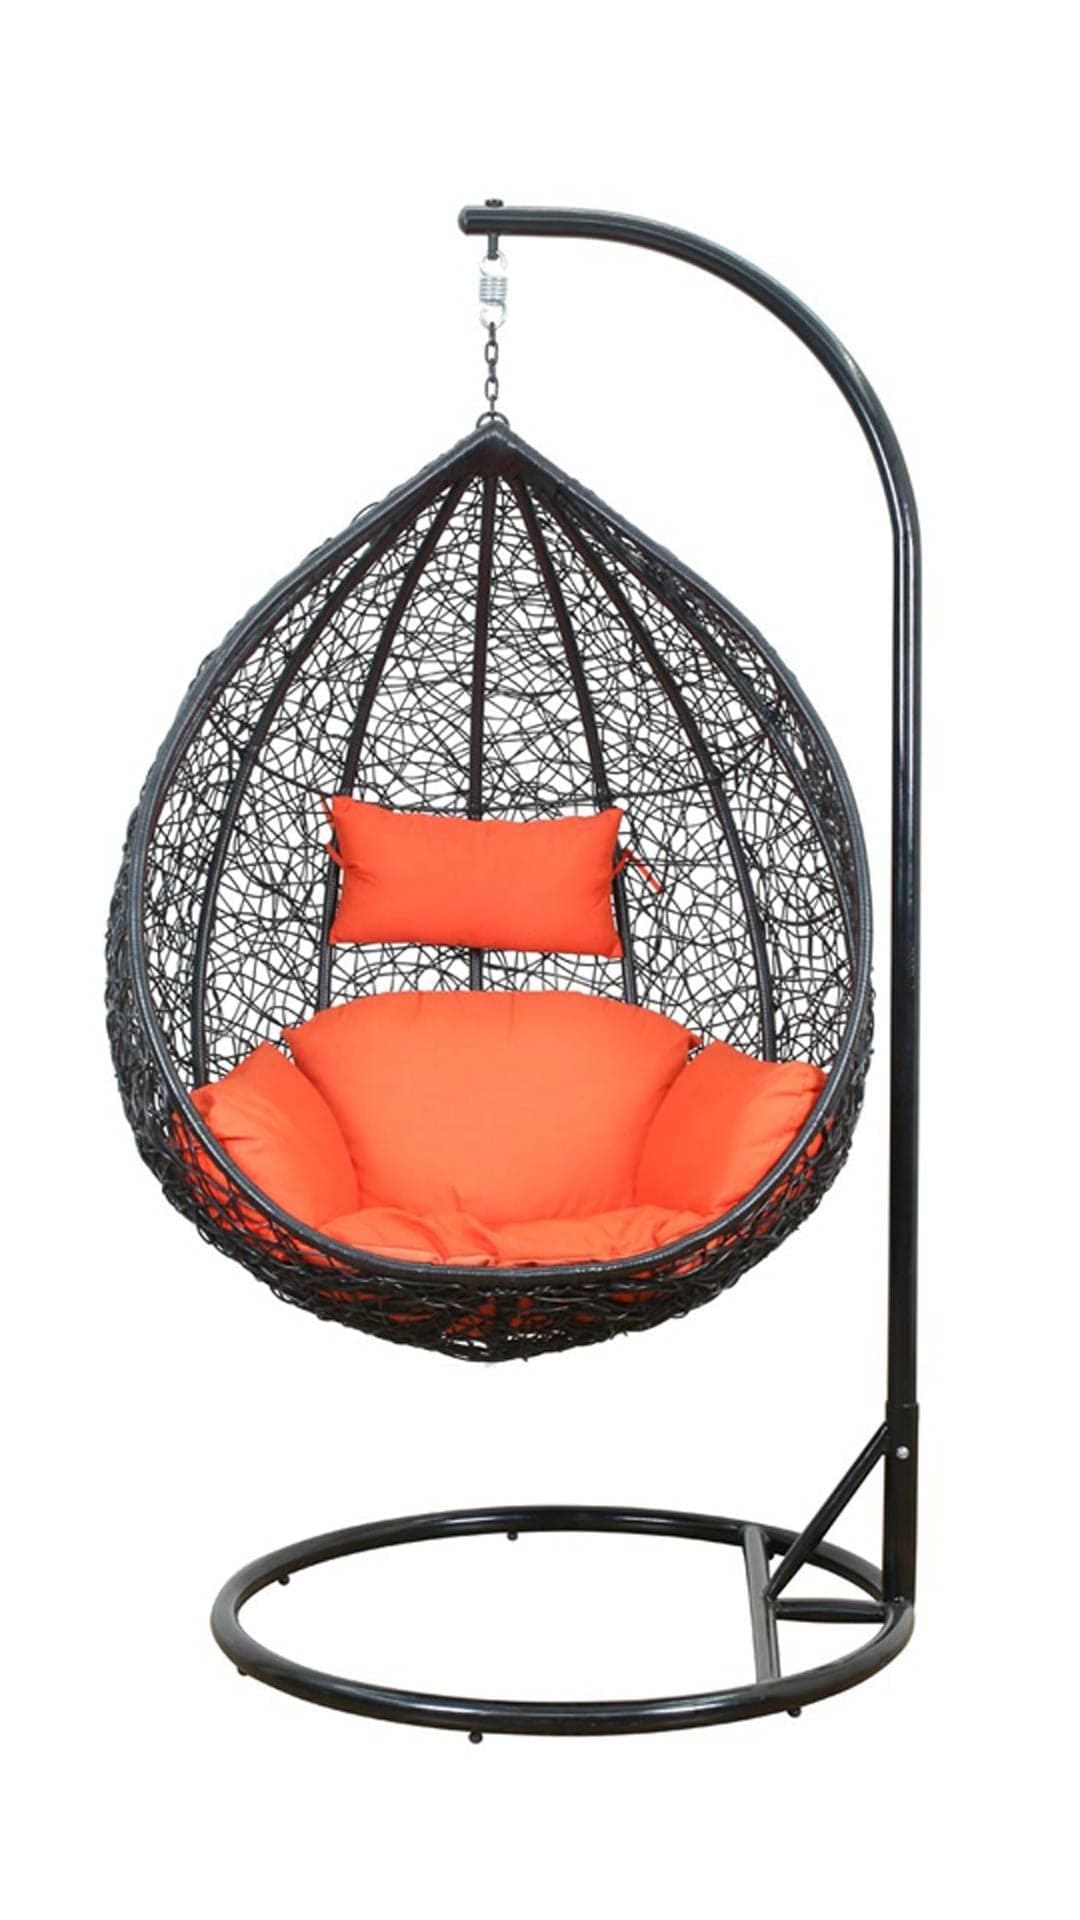 Dreamline Single Seater Hanging Swing With Stand For Balcony , Garden Swing (Orange Cushions)